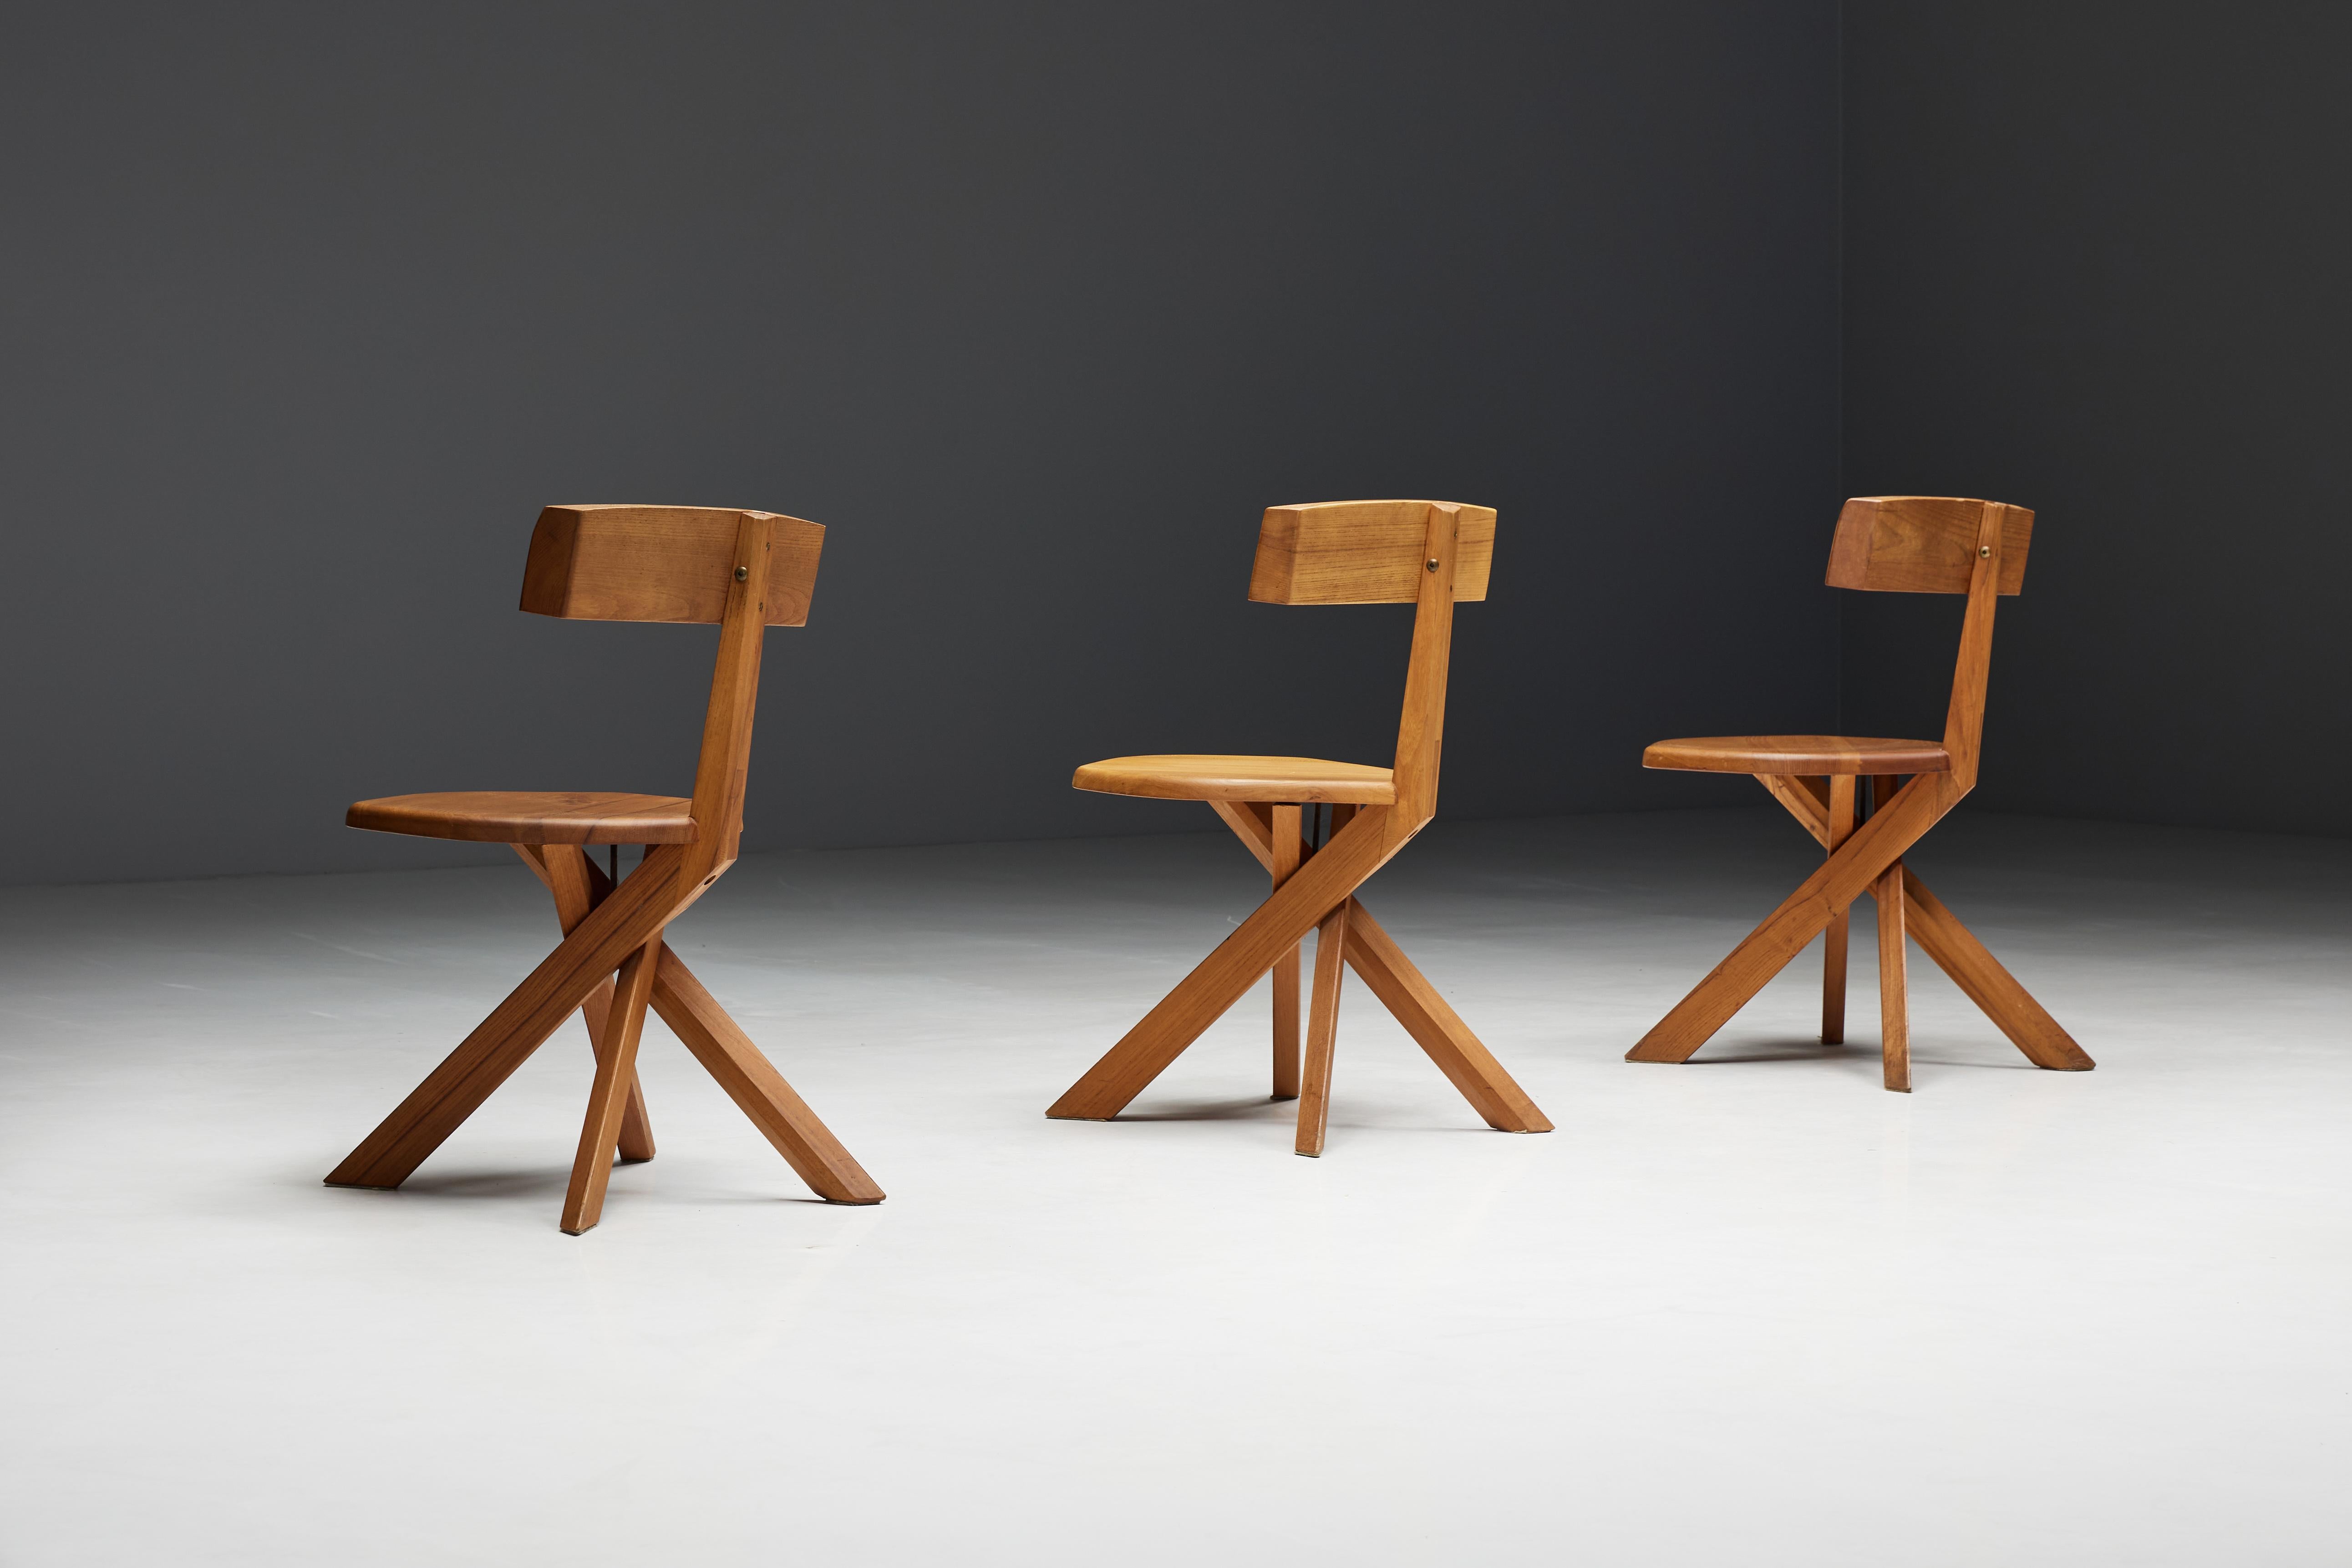 Pierre Chapo S34 dining chairs from 1970s France. These chairs embody the unique aesthetic typical of Pierre Chapo's iconic designs. The chairs' distinctive cross base harmonizes beautifully with the backrest, which is subtly positioned slightly